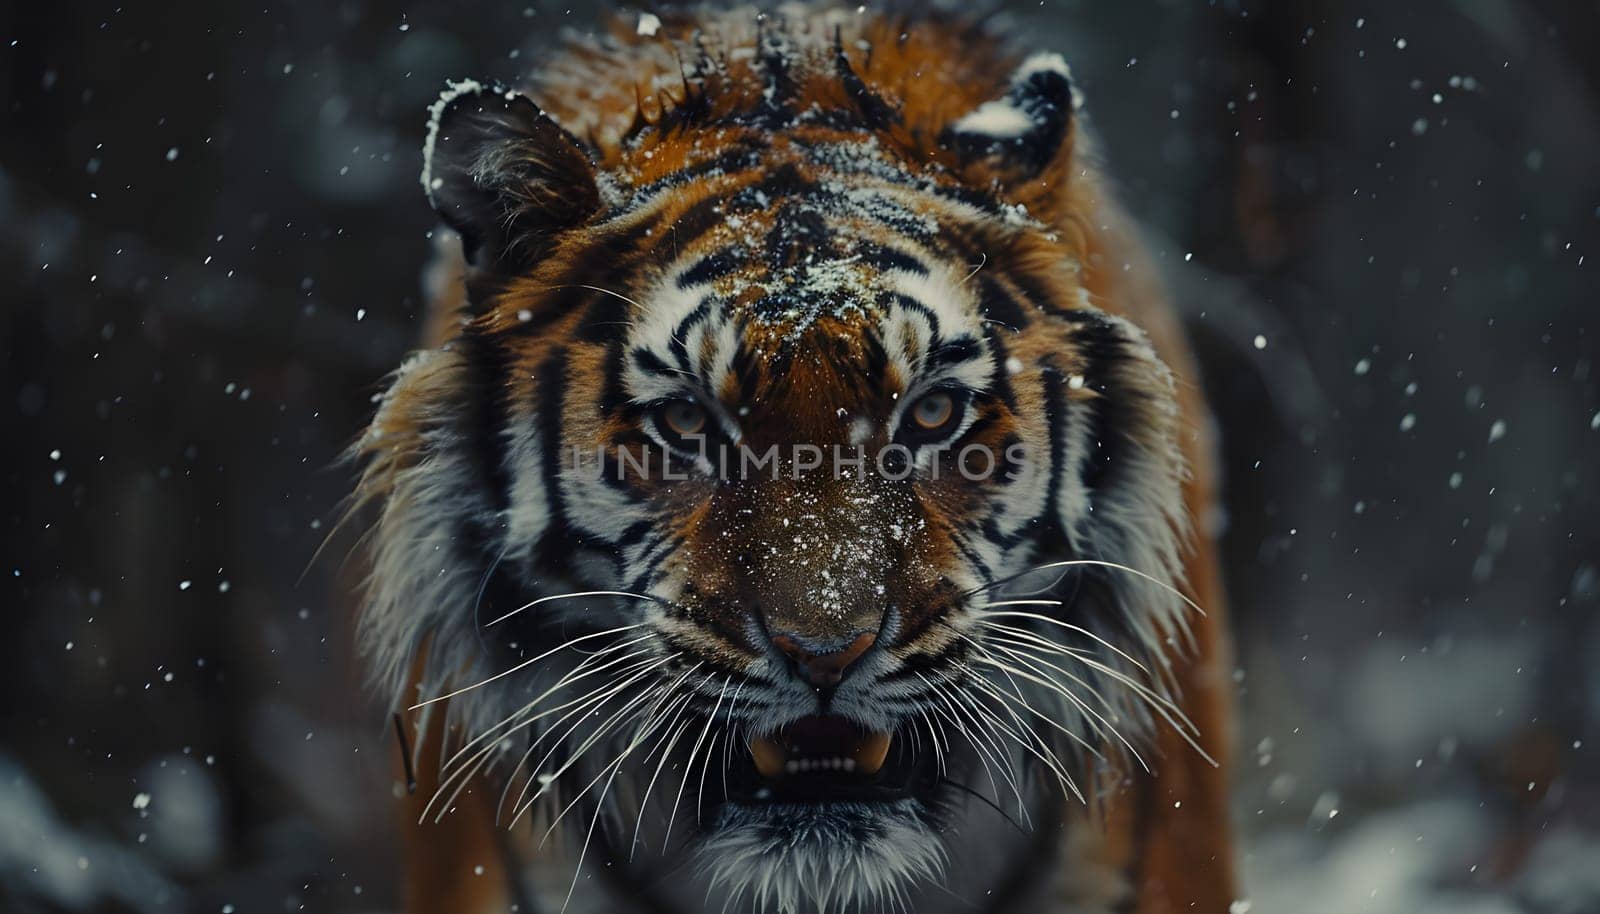 Siberian tiger stalks through snowy forest, a majestic carnivore in its element by Nadtochiy